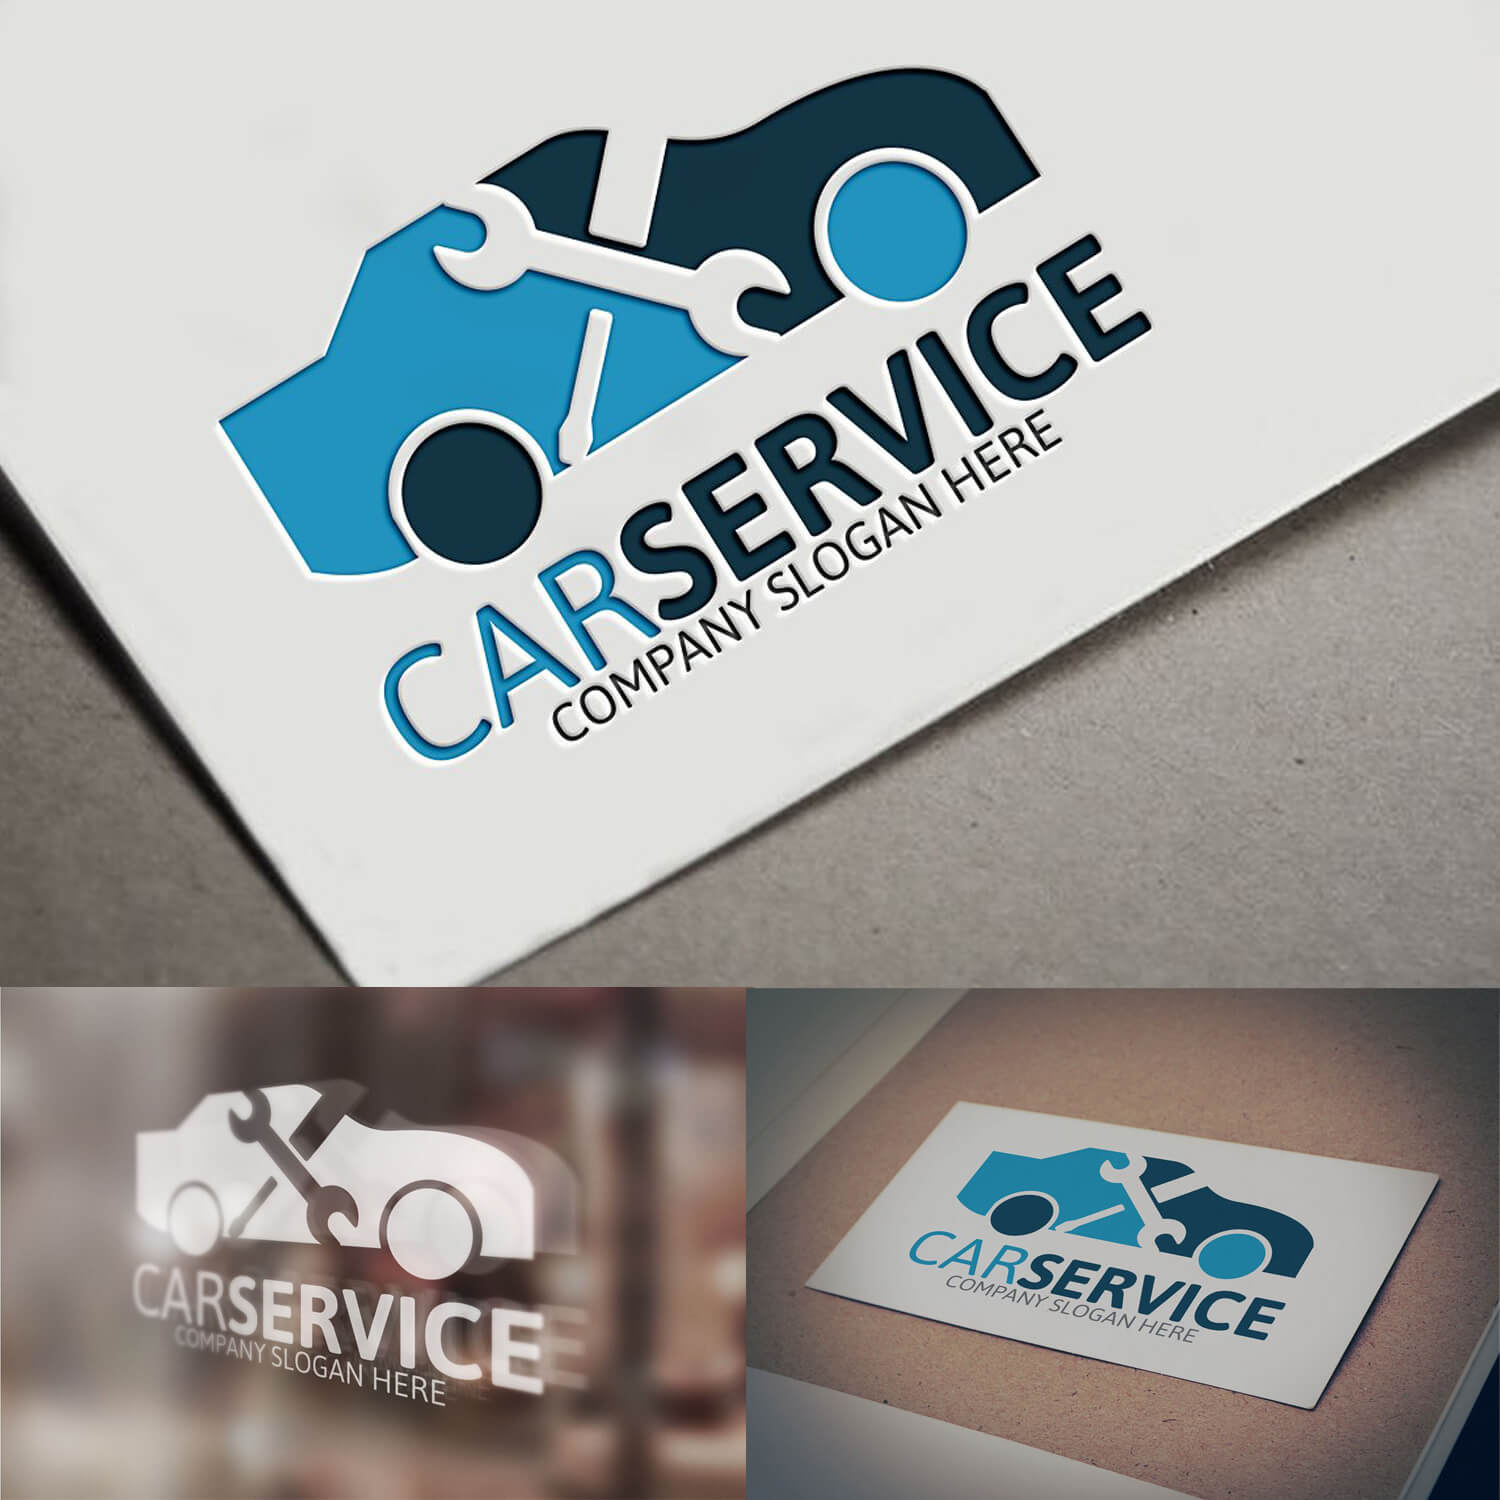 Blue-blue, white logo of a car service and a business card with a logo.